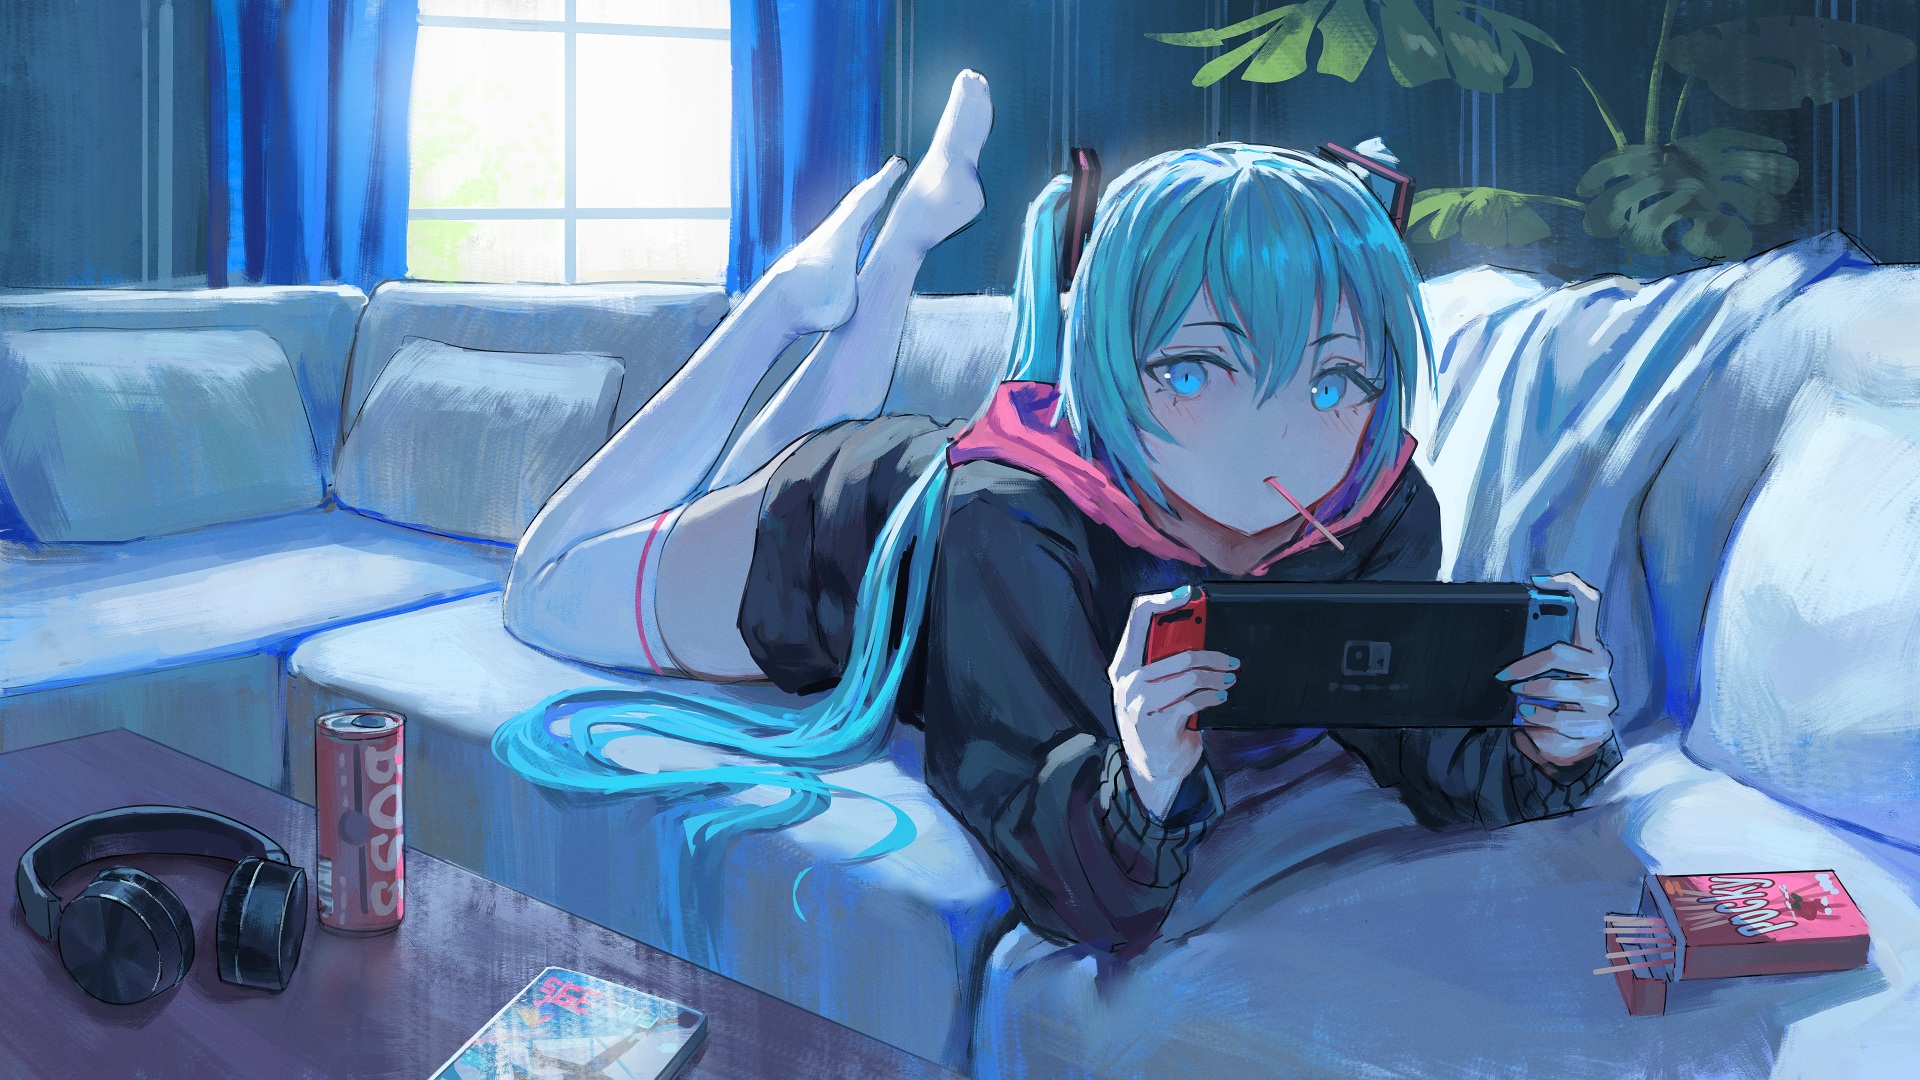 Anime Anime Girls Lying On Couch Couch Headphones Blue Eyes Nintendo Switch Pocky Hatsune Miku Vocal 1920x1080